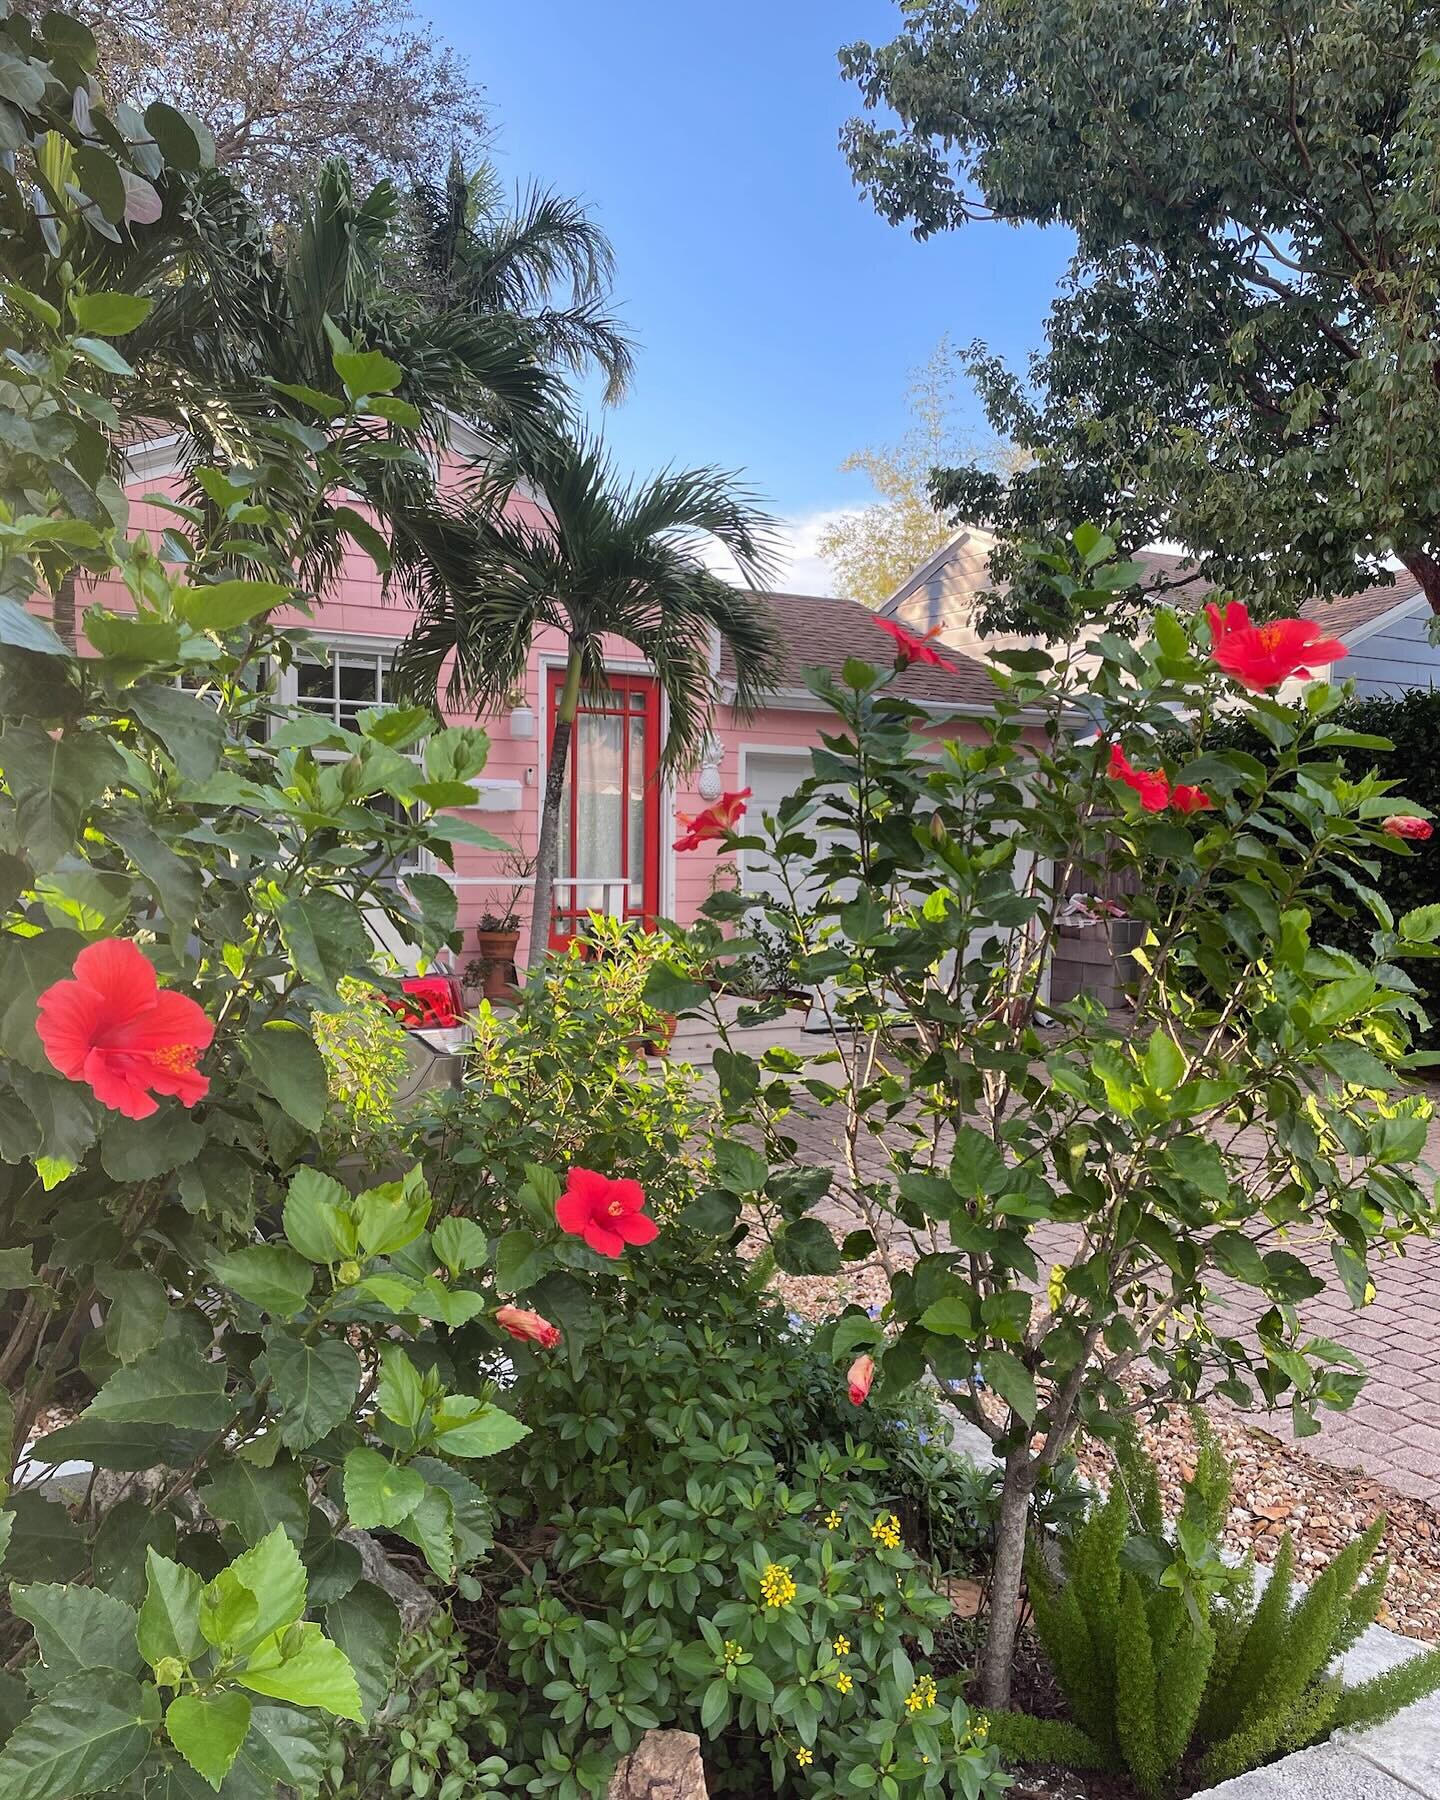 Hibiscus looking lovely before the baby iguanas come for their daily flower feast. 🌺🦎🌺🦎🌺🦎🌺